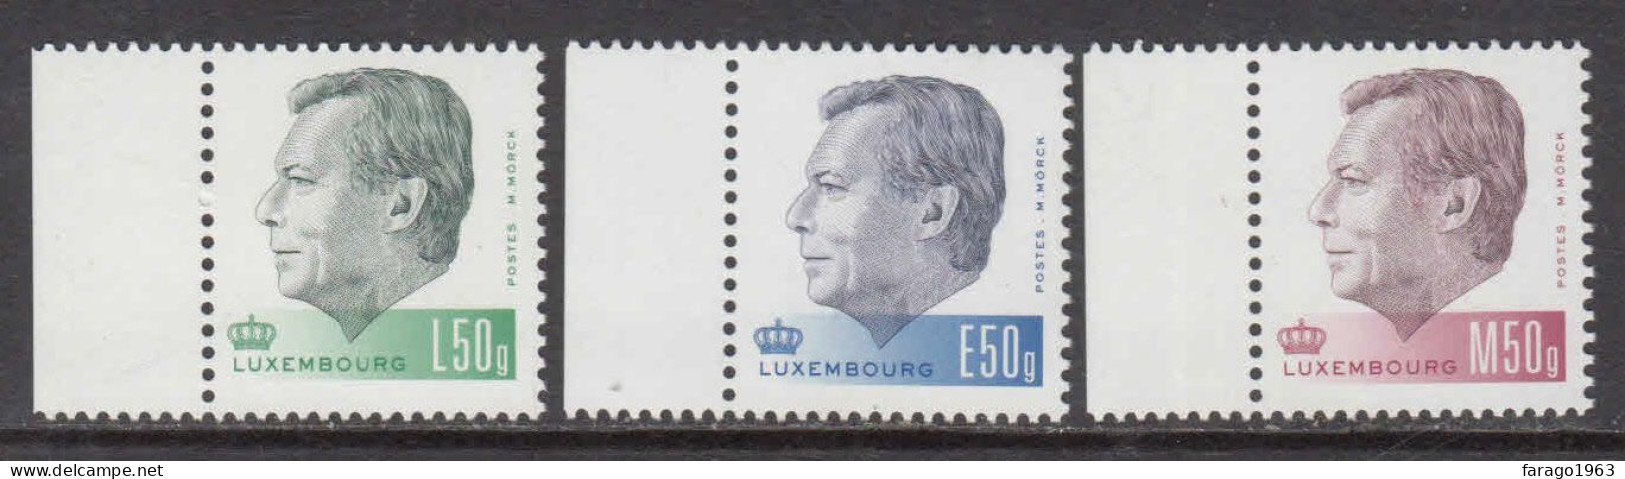 2015 Luxembourg Definitives Complete Set Of 3 MNH @ BELOW FACE VALUE - Neufs